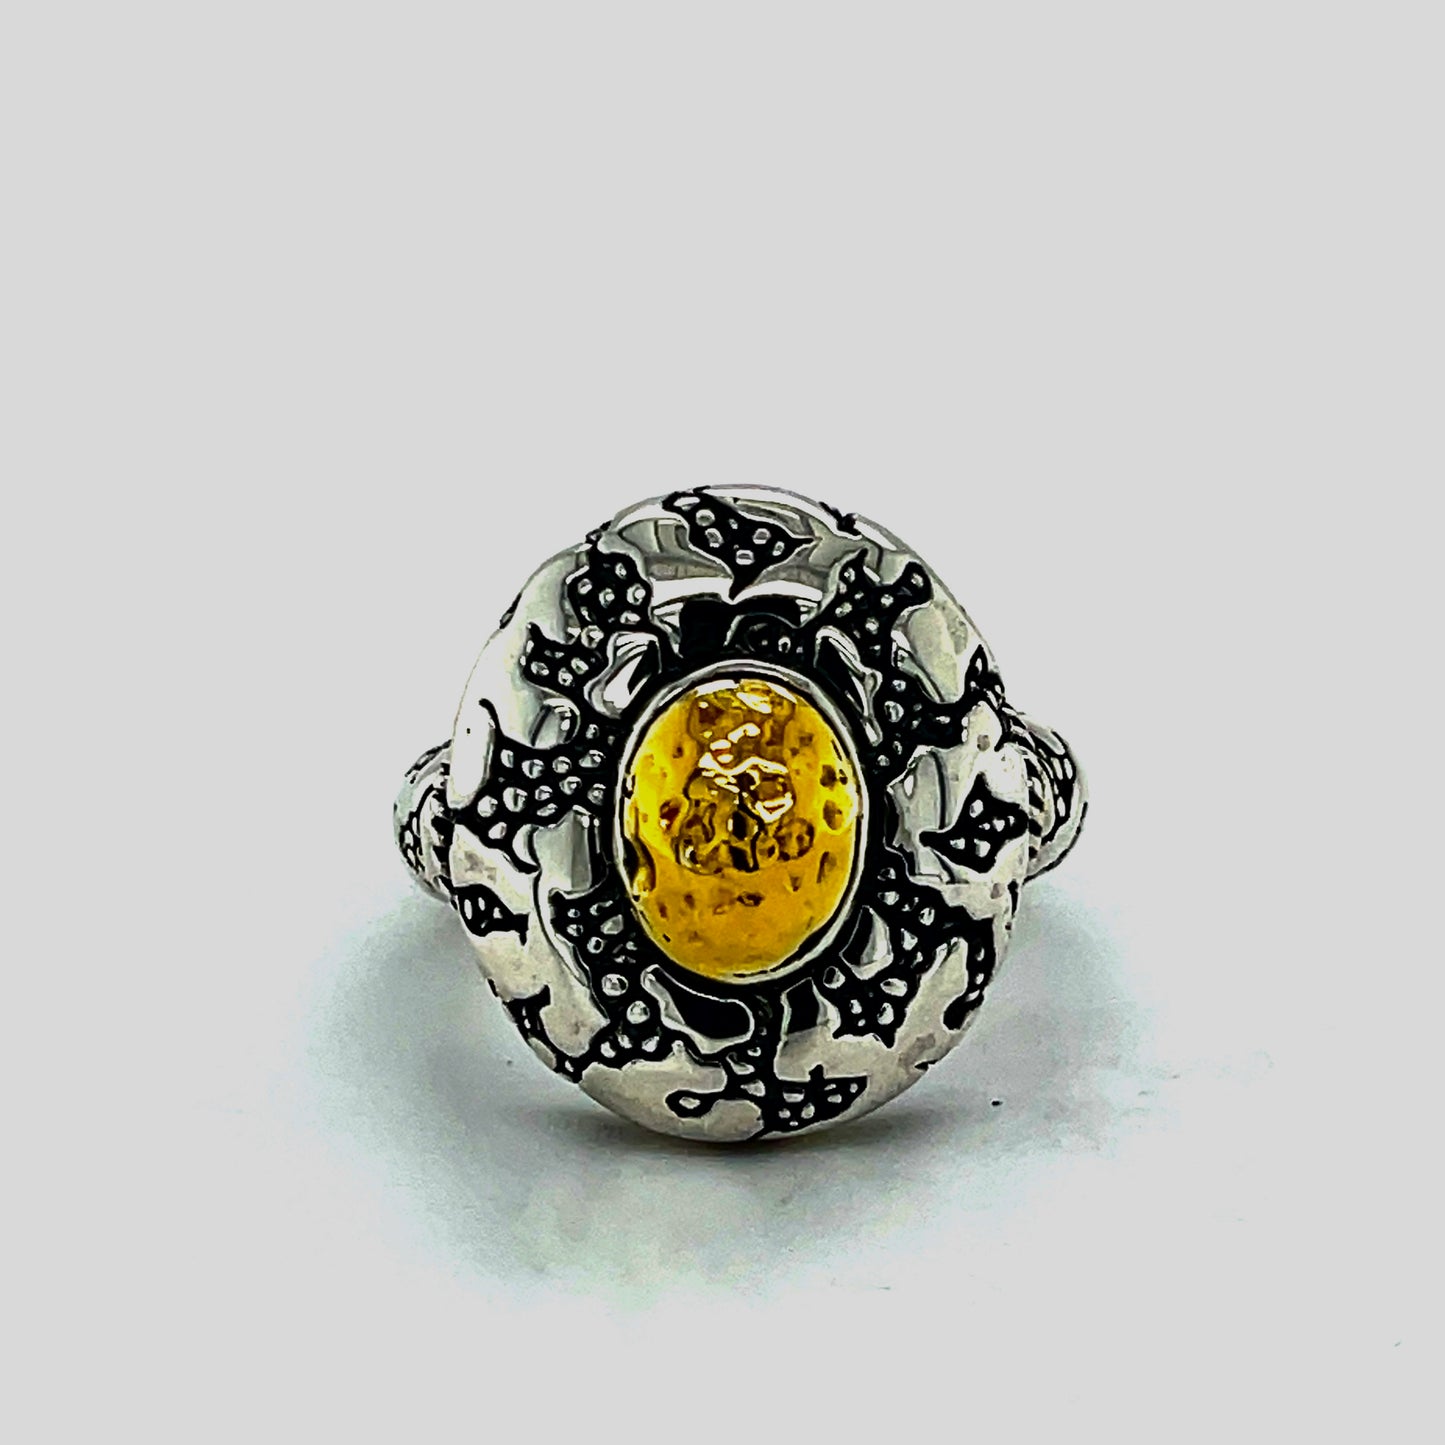 Silver and 18kt Gold ring